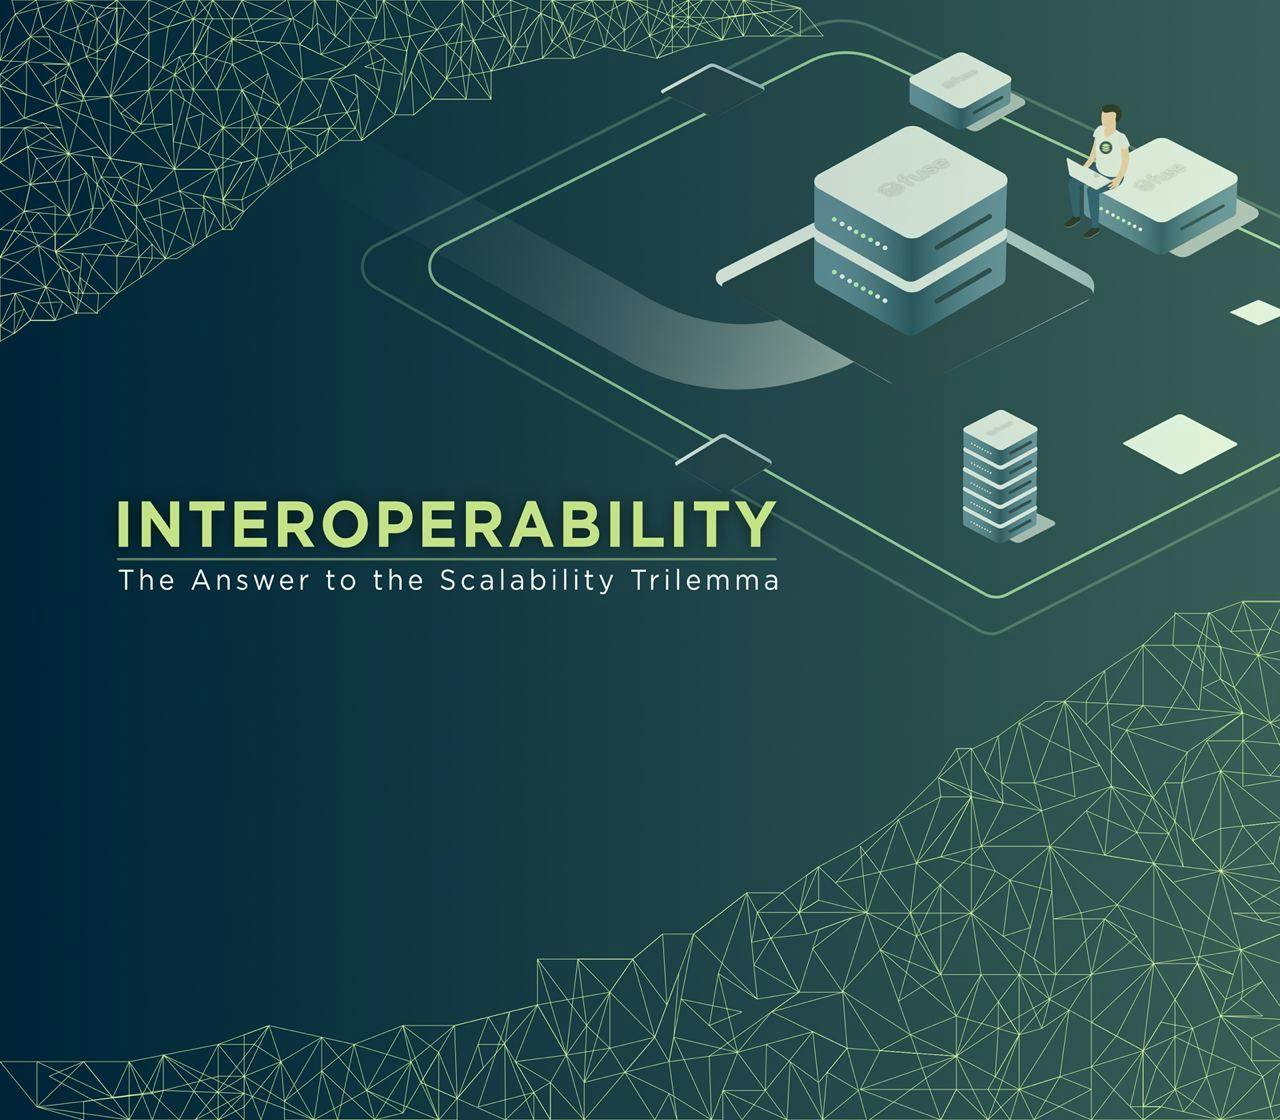 /interoperability-the-answer-to-the-scalability-trilemma-j2q33ea feature image